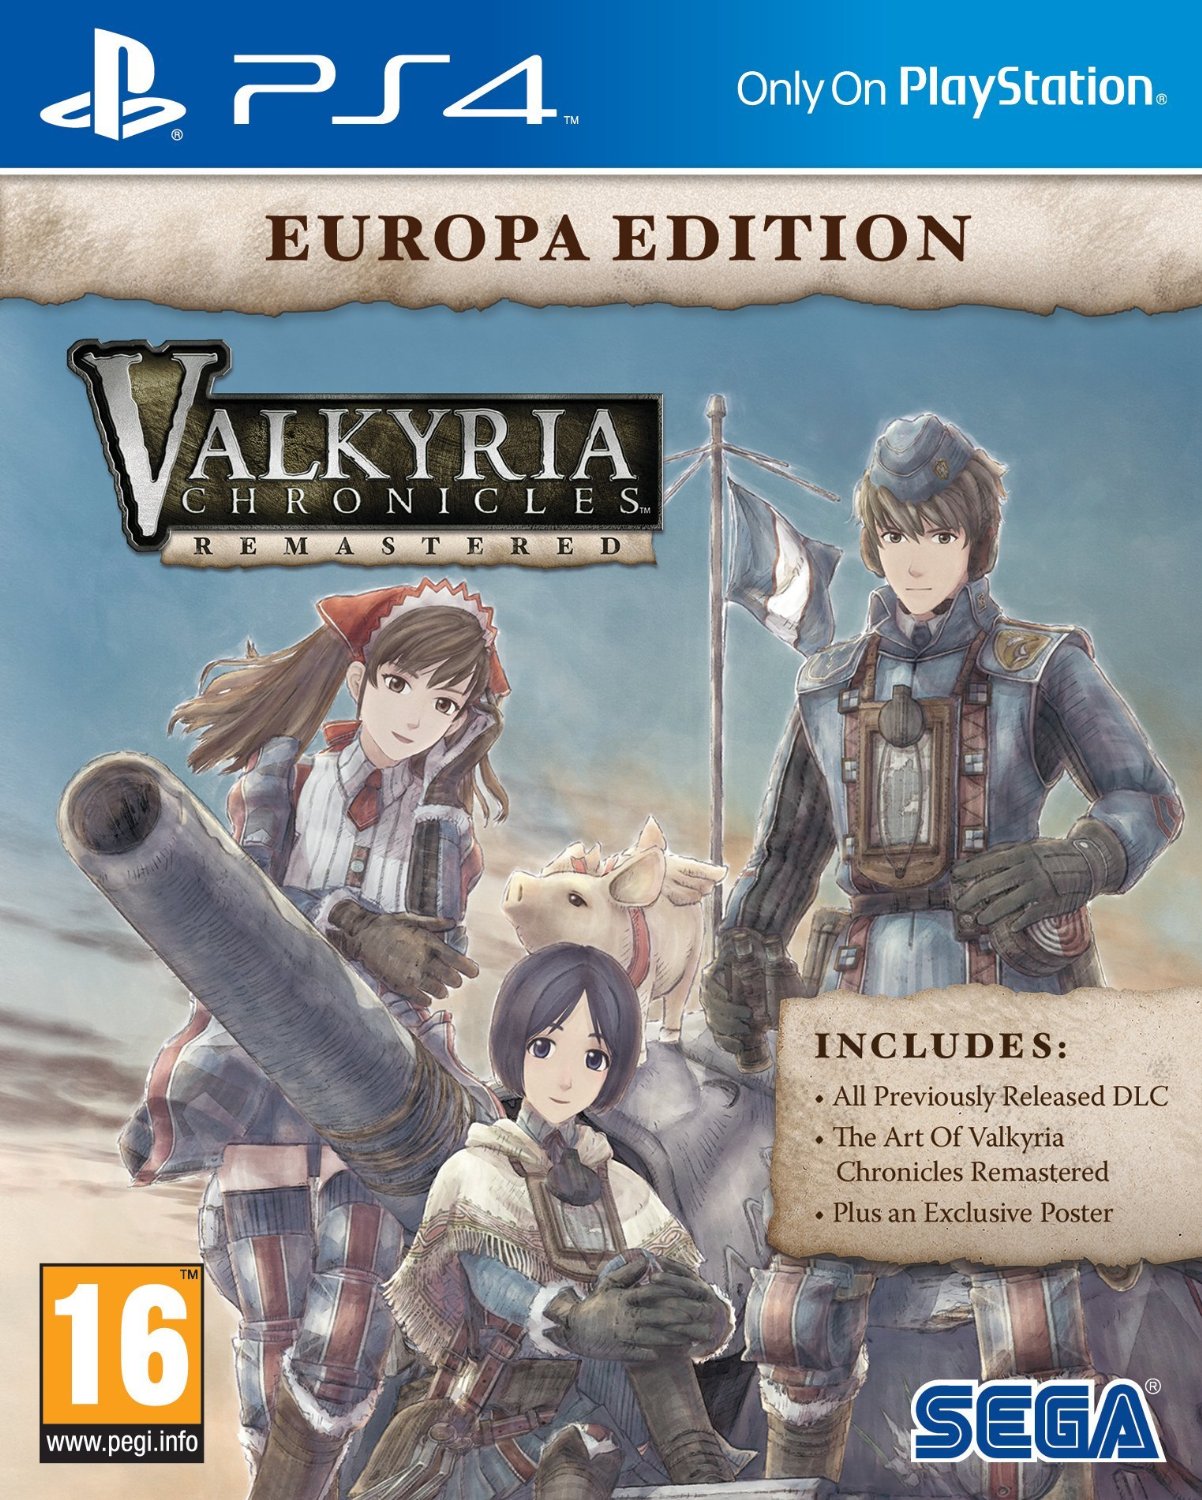 Review Valkyria Chronicles Remastered Playstation 4